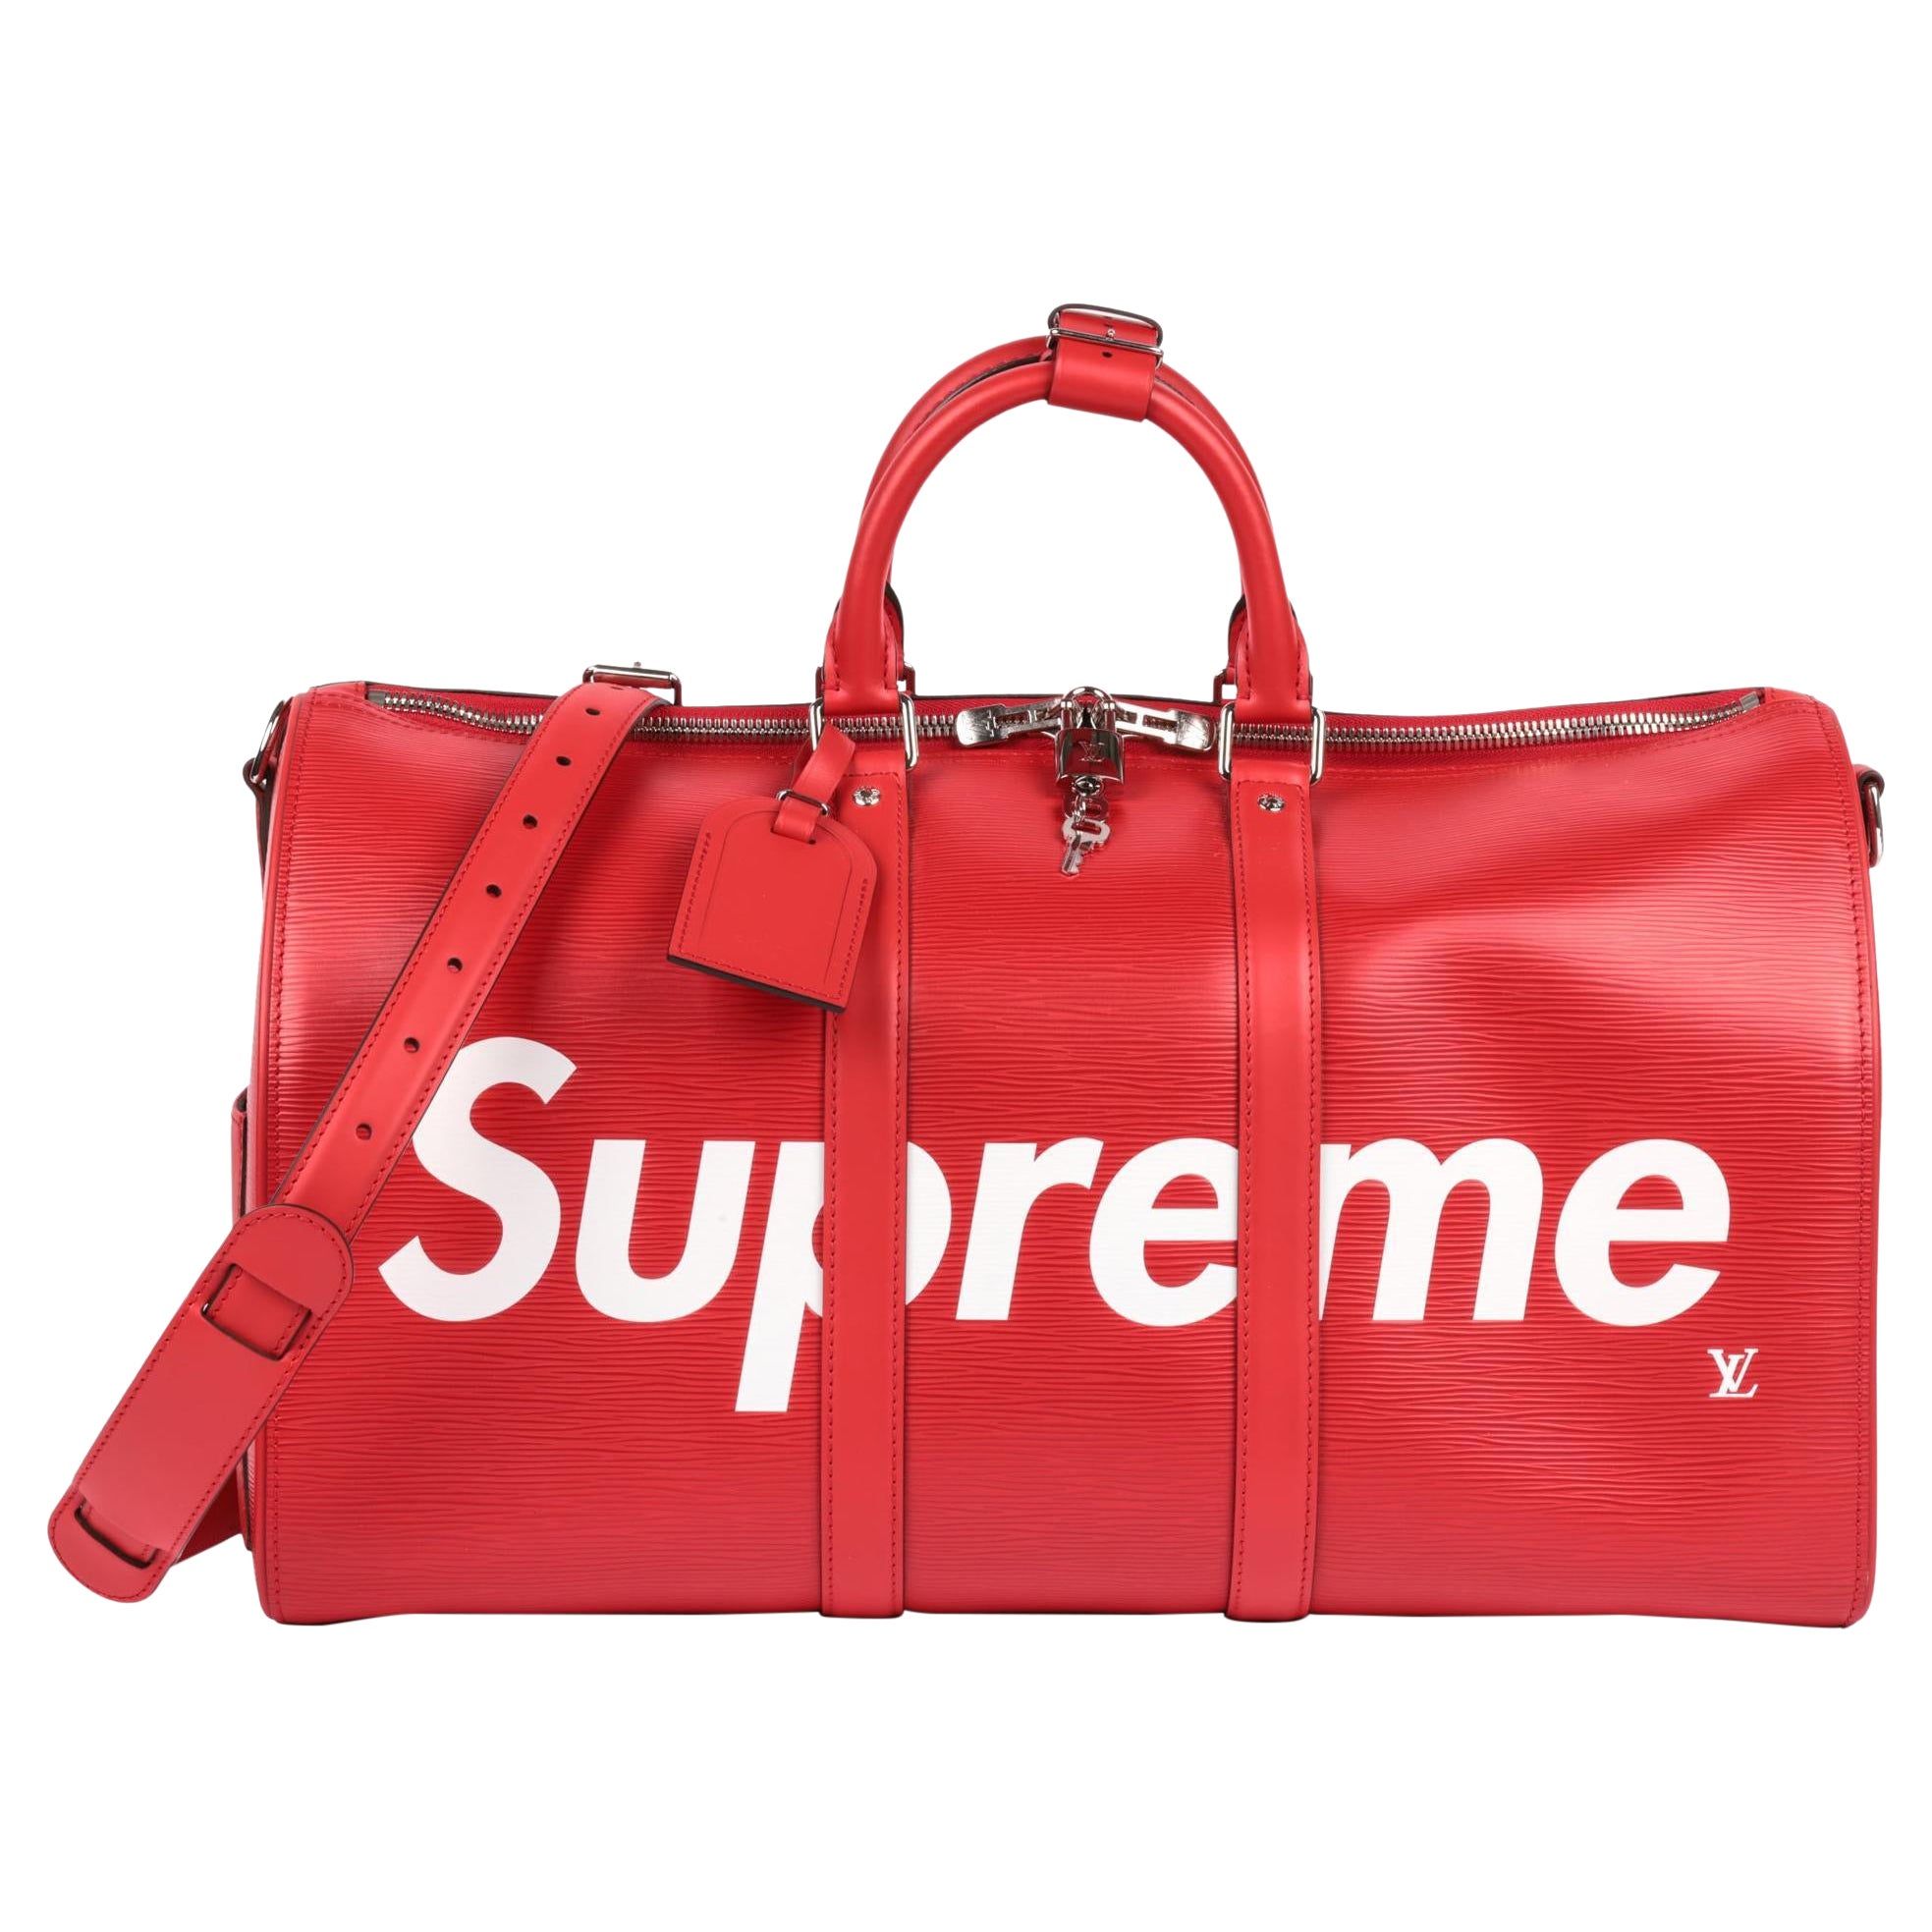 Supreme Louis Vuitton Duffel Bag for Sale in Portland OR  OfferUp